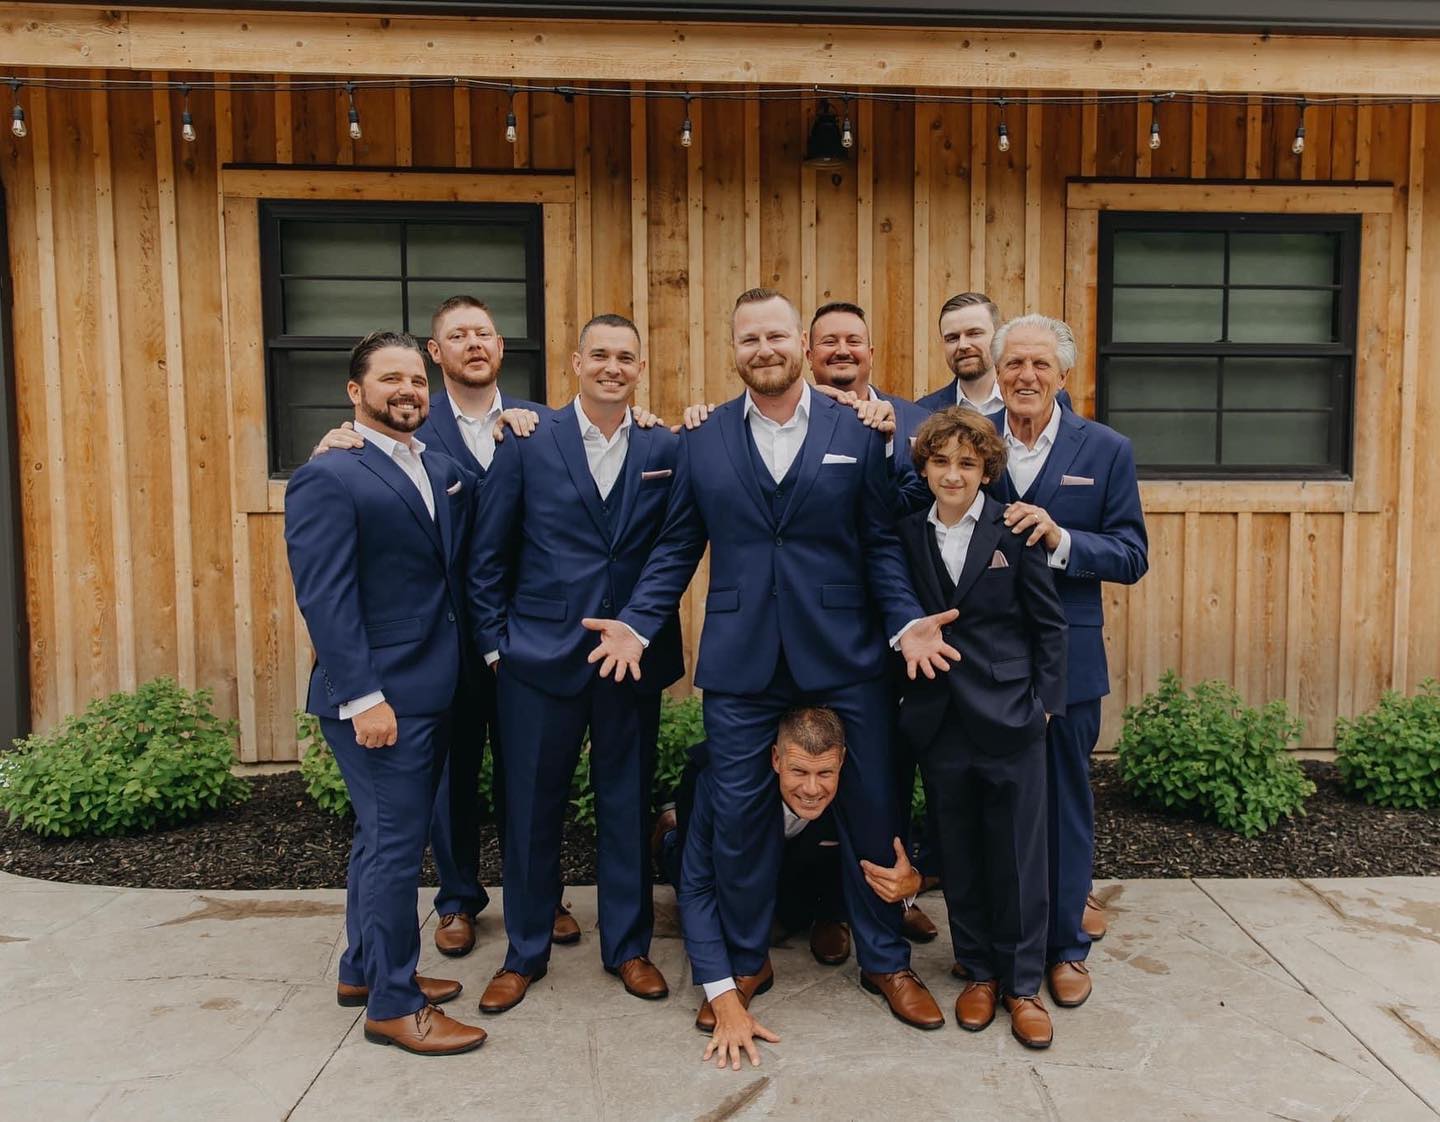 group of men wearing navy blue dress suits